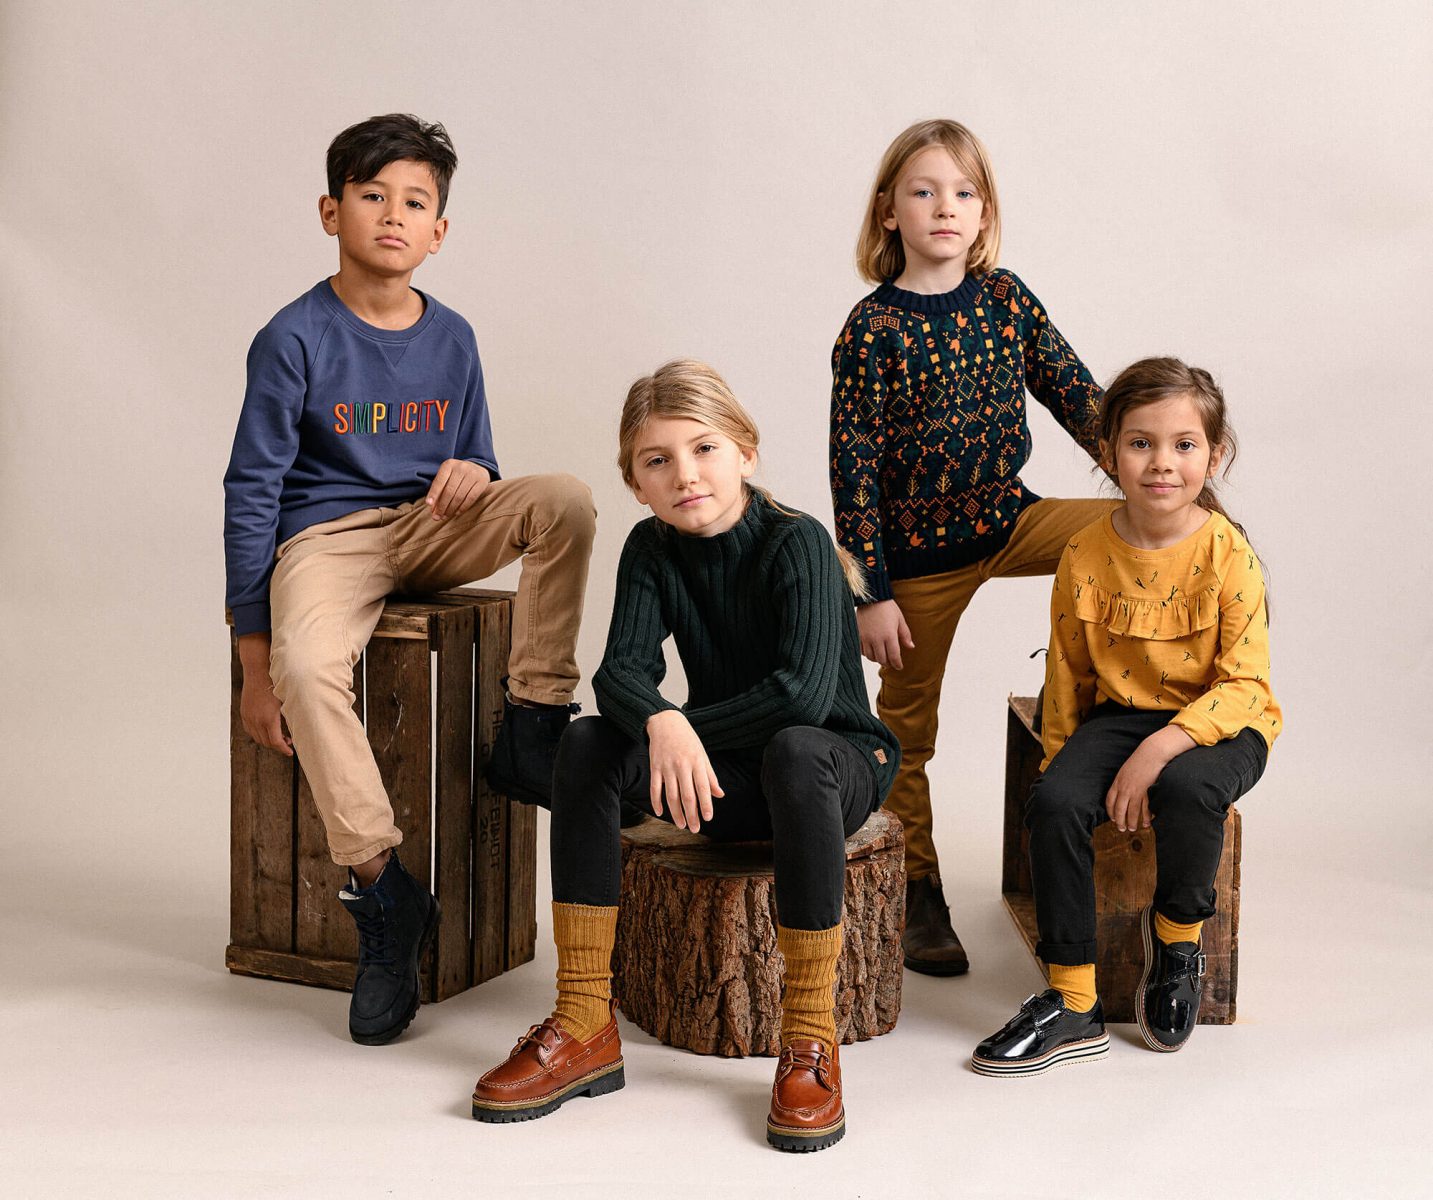 Bunch of kids posing in a studio environment